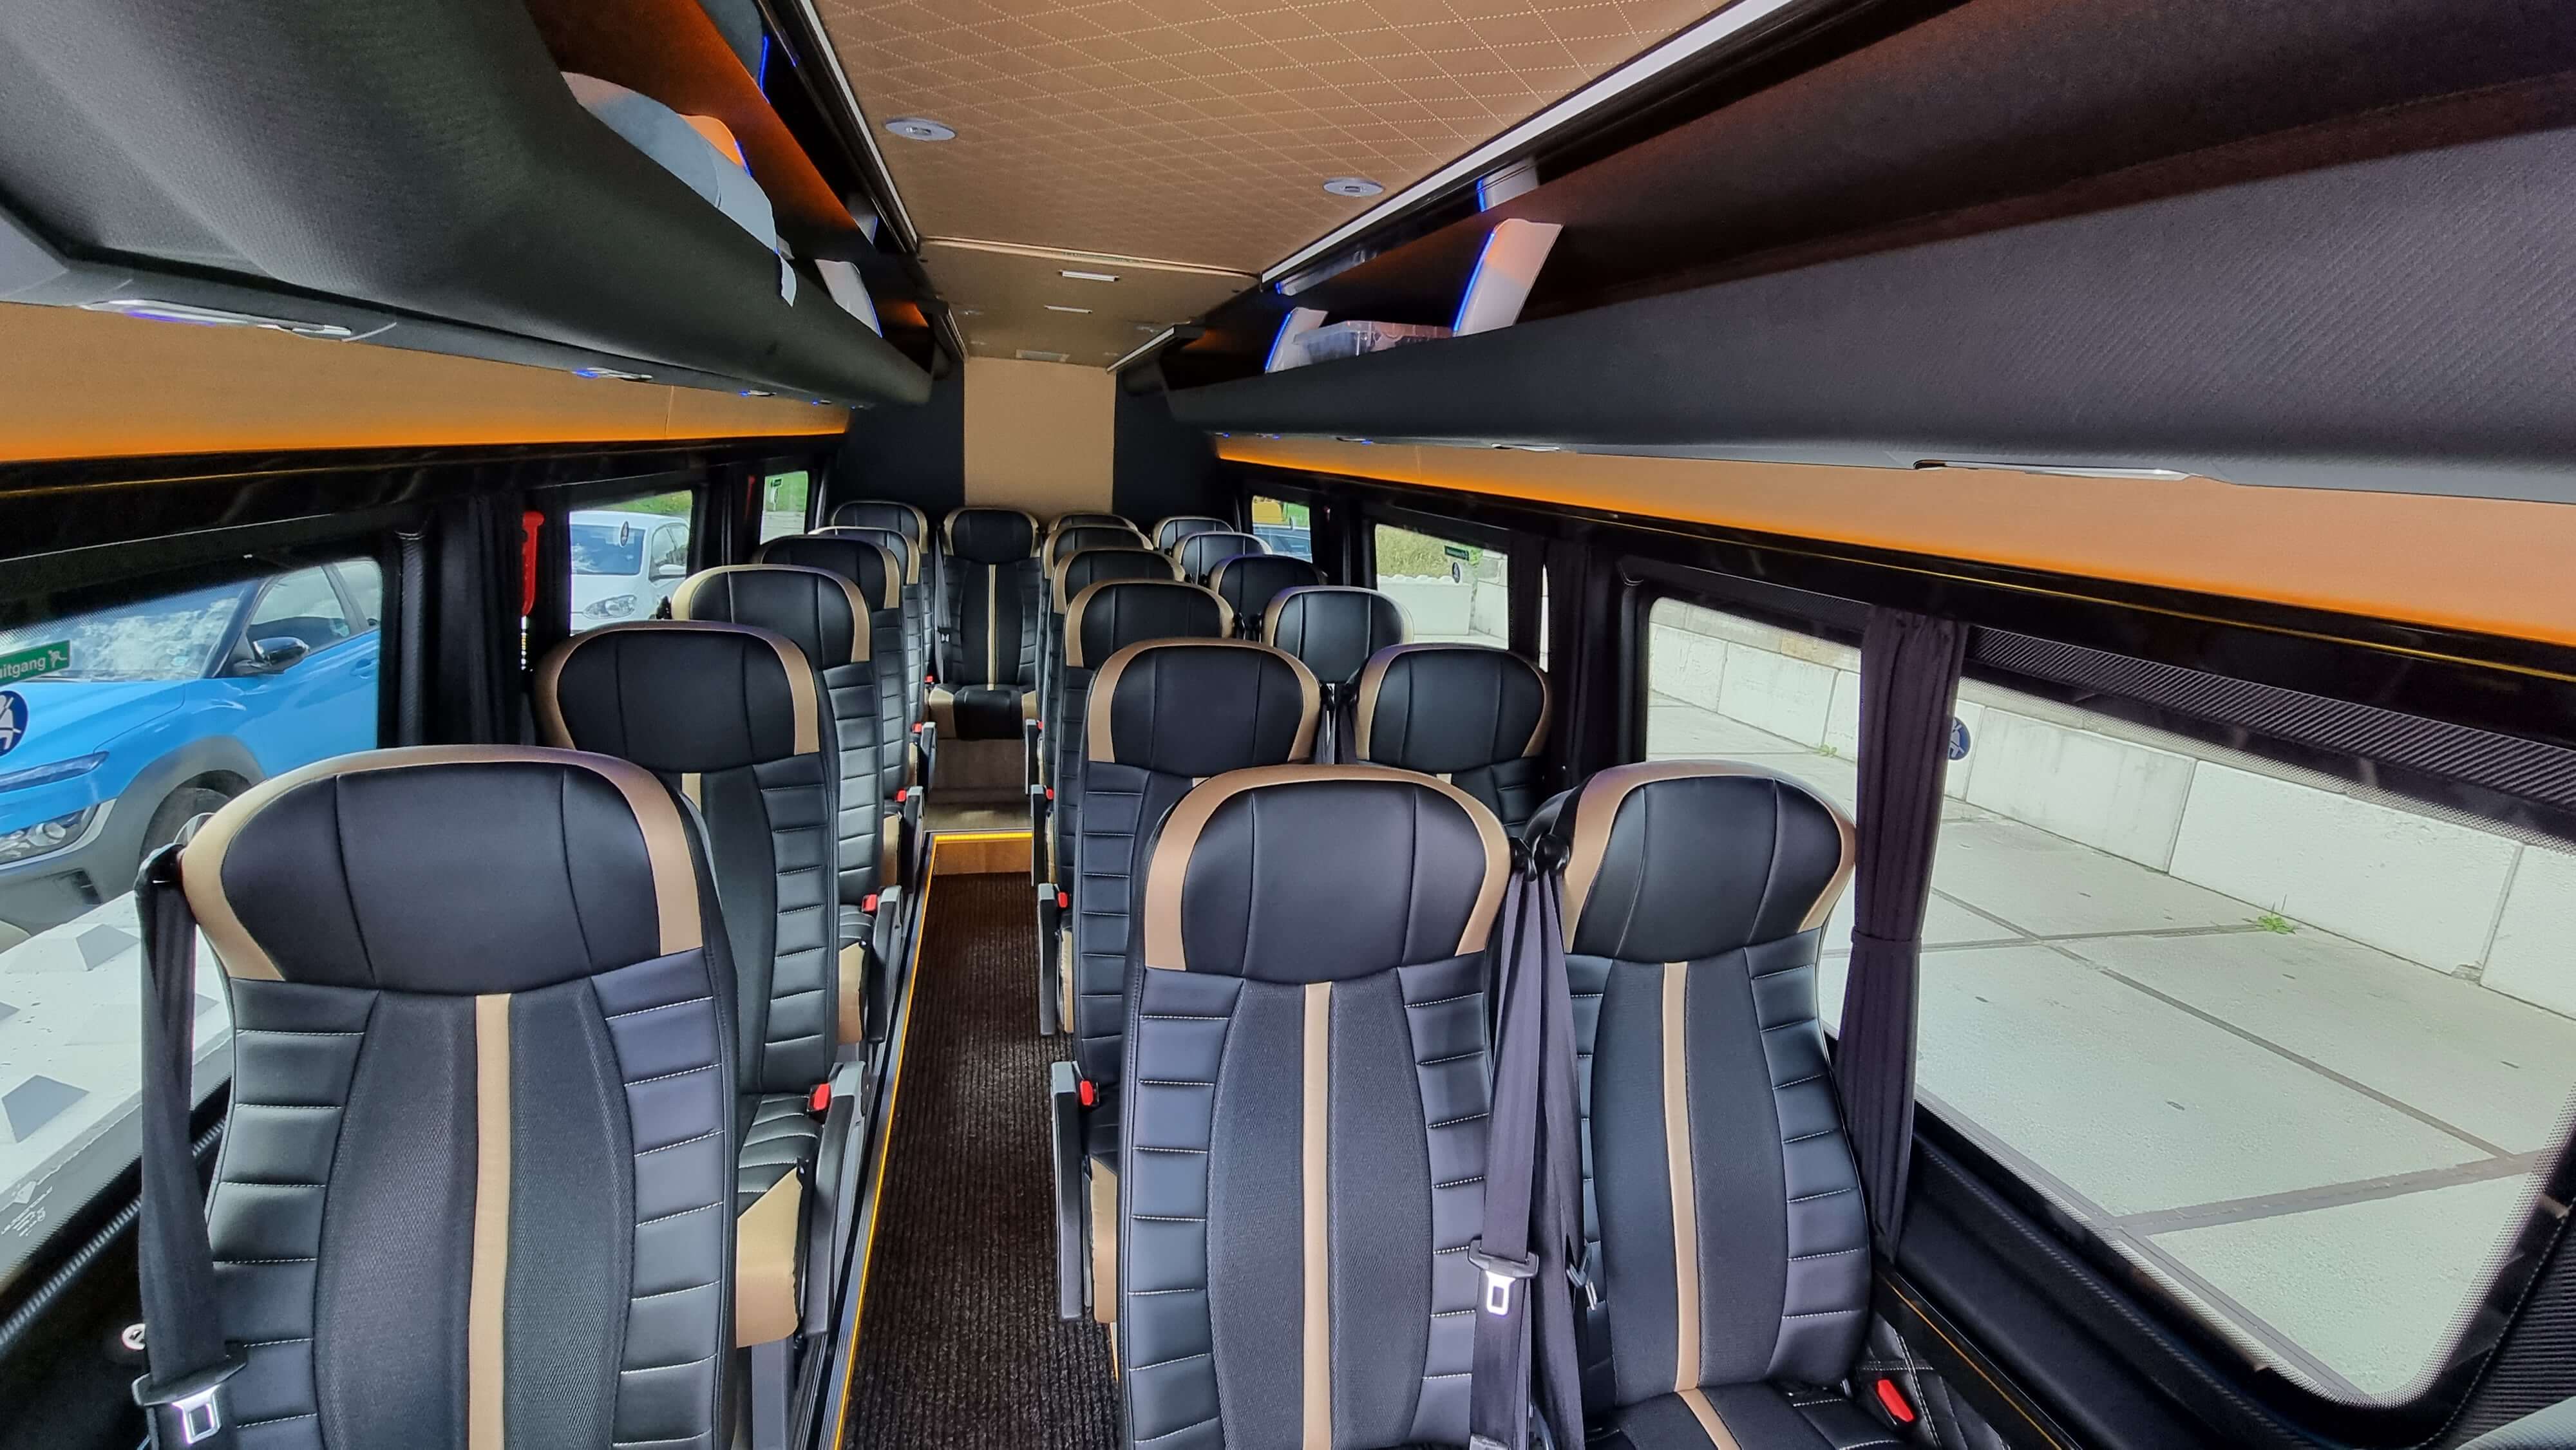 Rent a 20 seater Midibus (Mercedes VIP Sprinter 2021) from Direct Vip Service from Amsterdam 